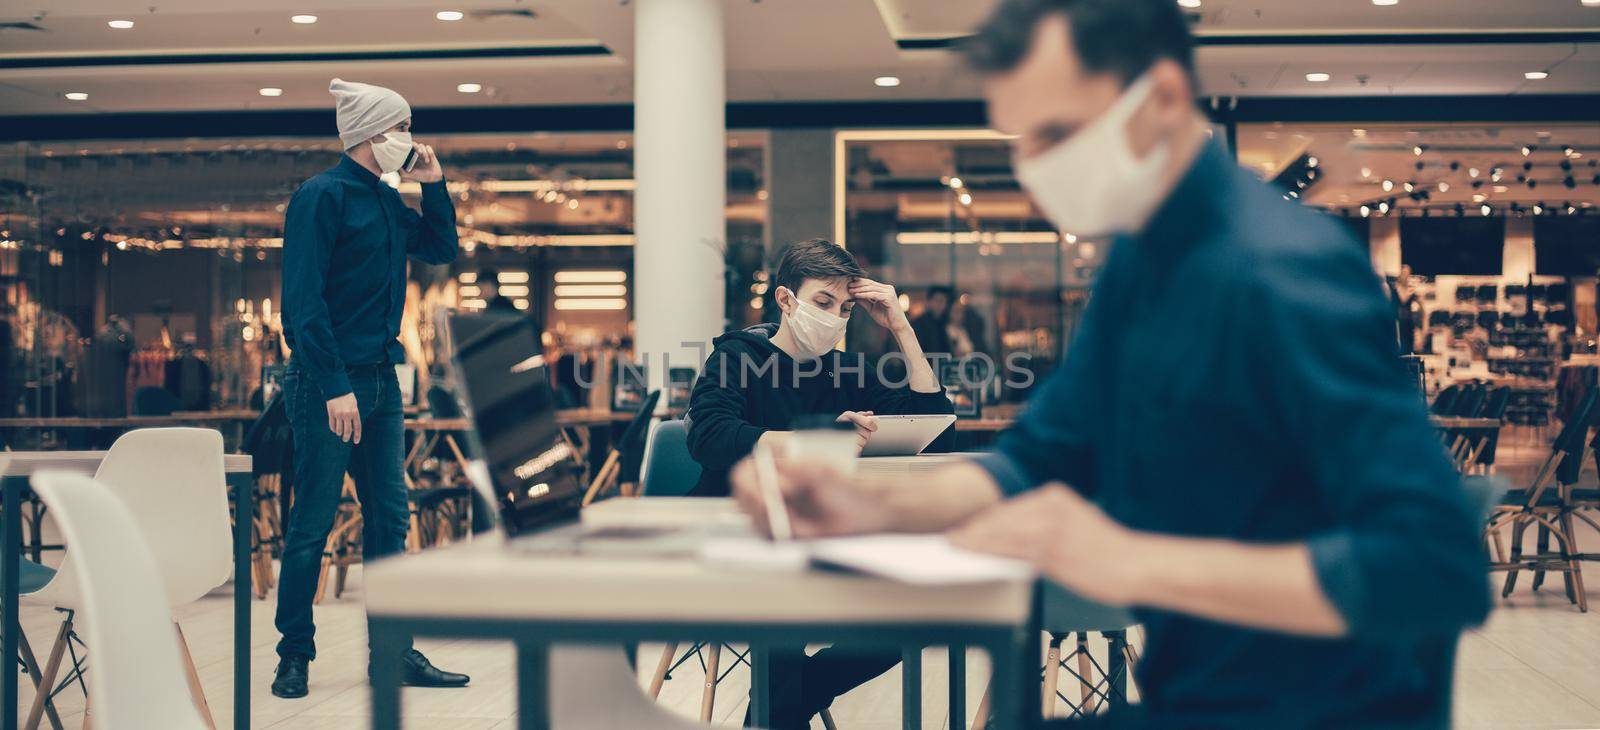 image of visitors in the food court during the quarantine period by SmartPhotoLab